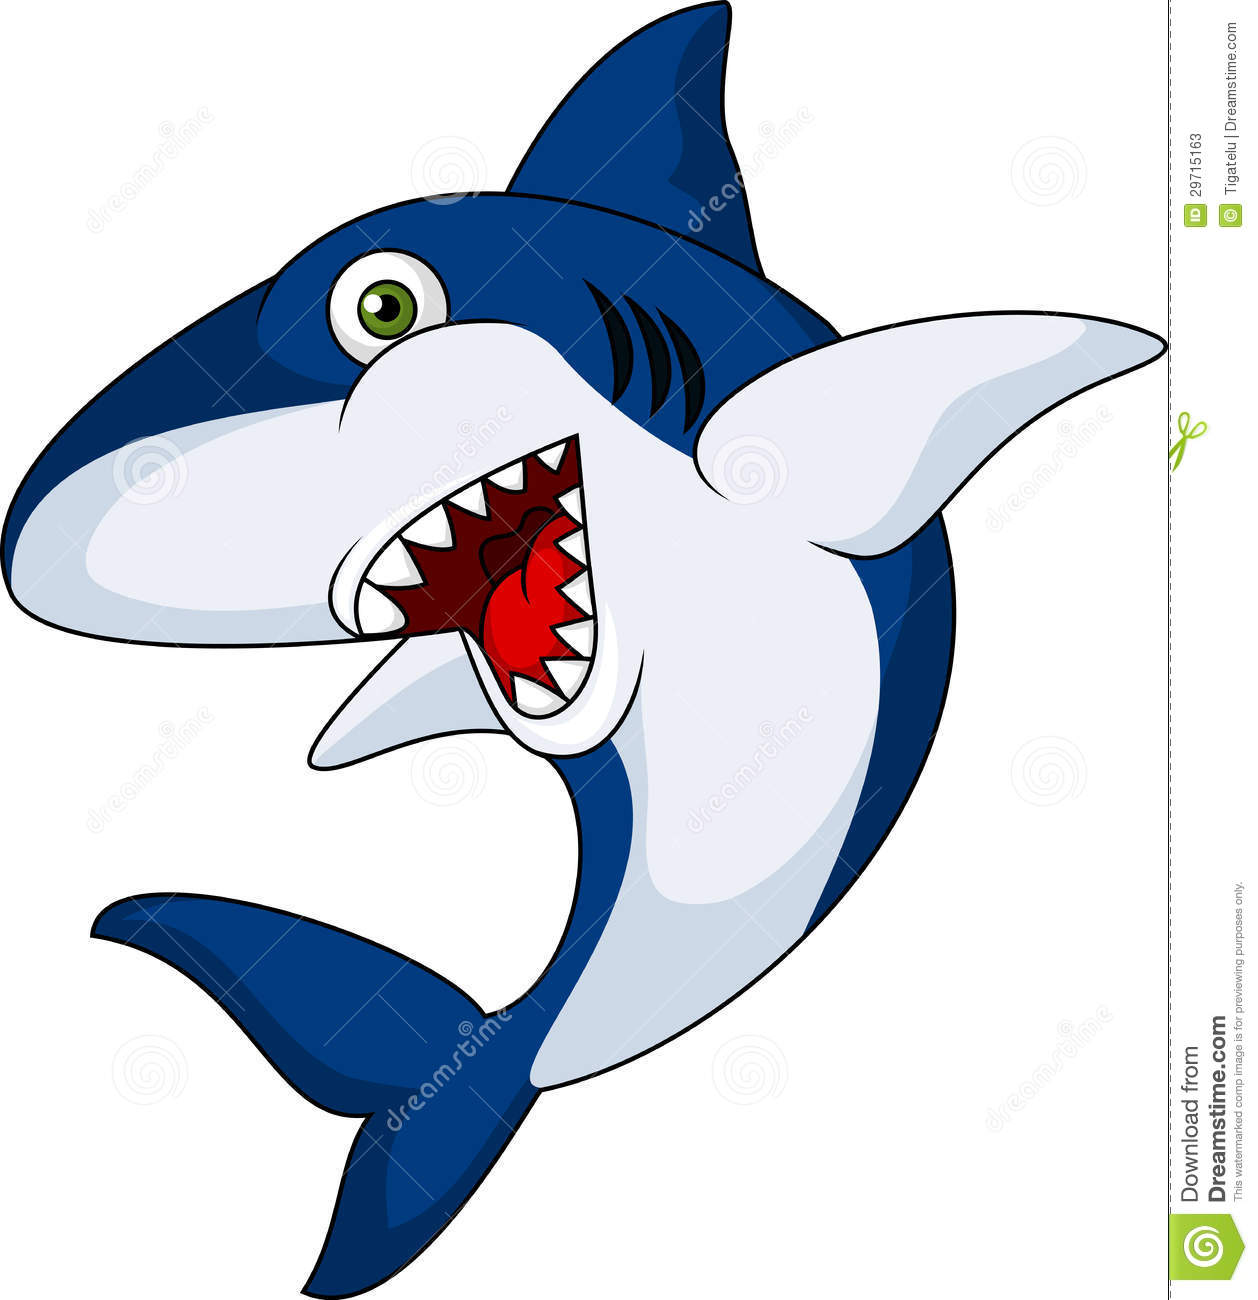 Illustration Of Shark Cartoon With Open Mouth